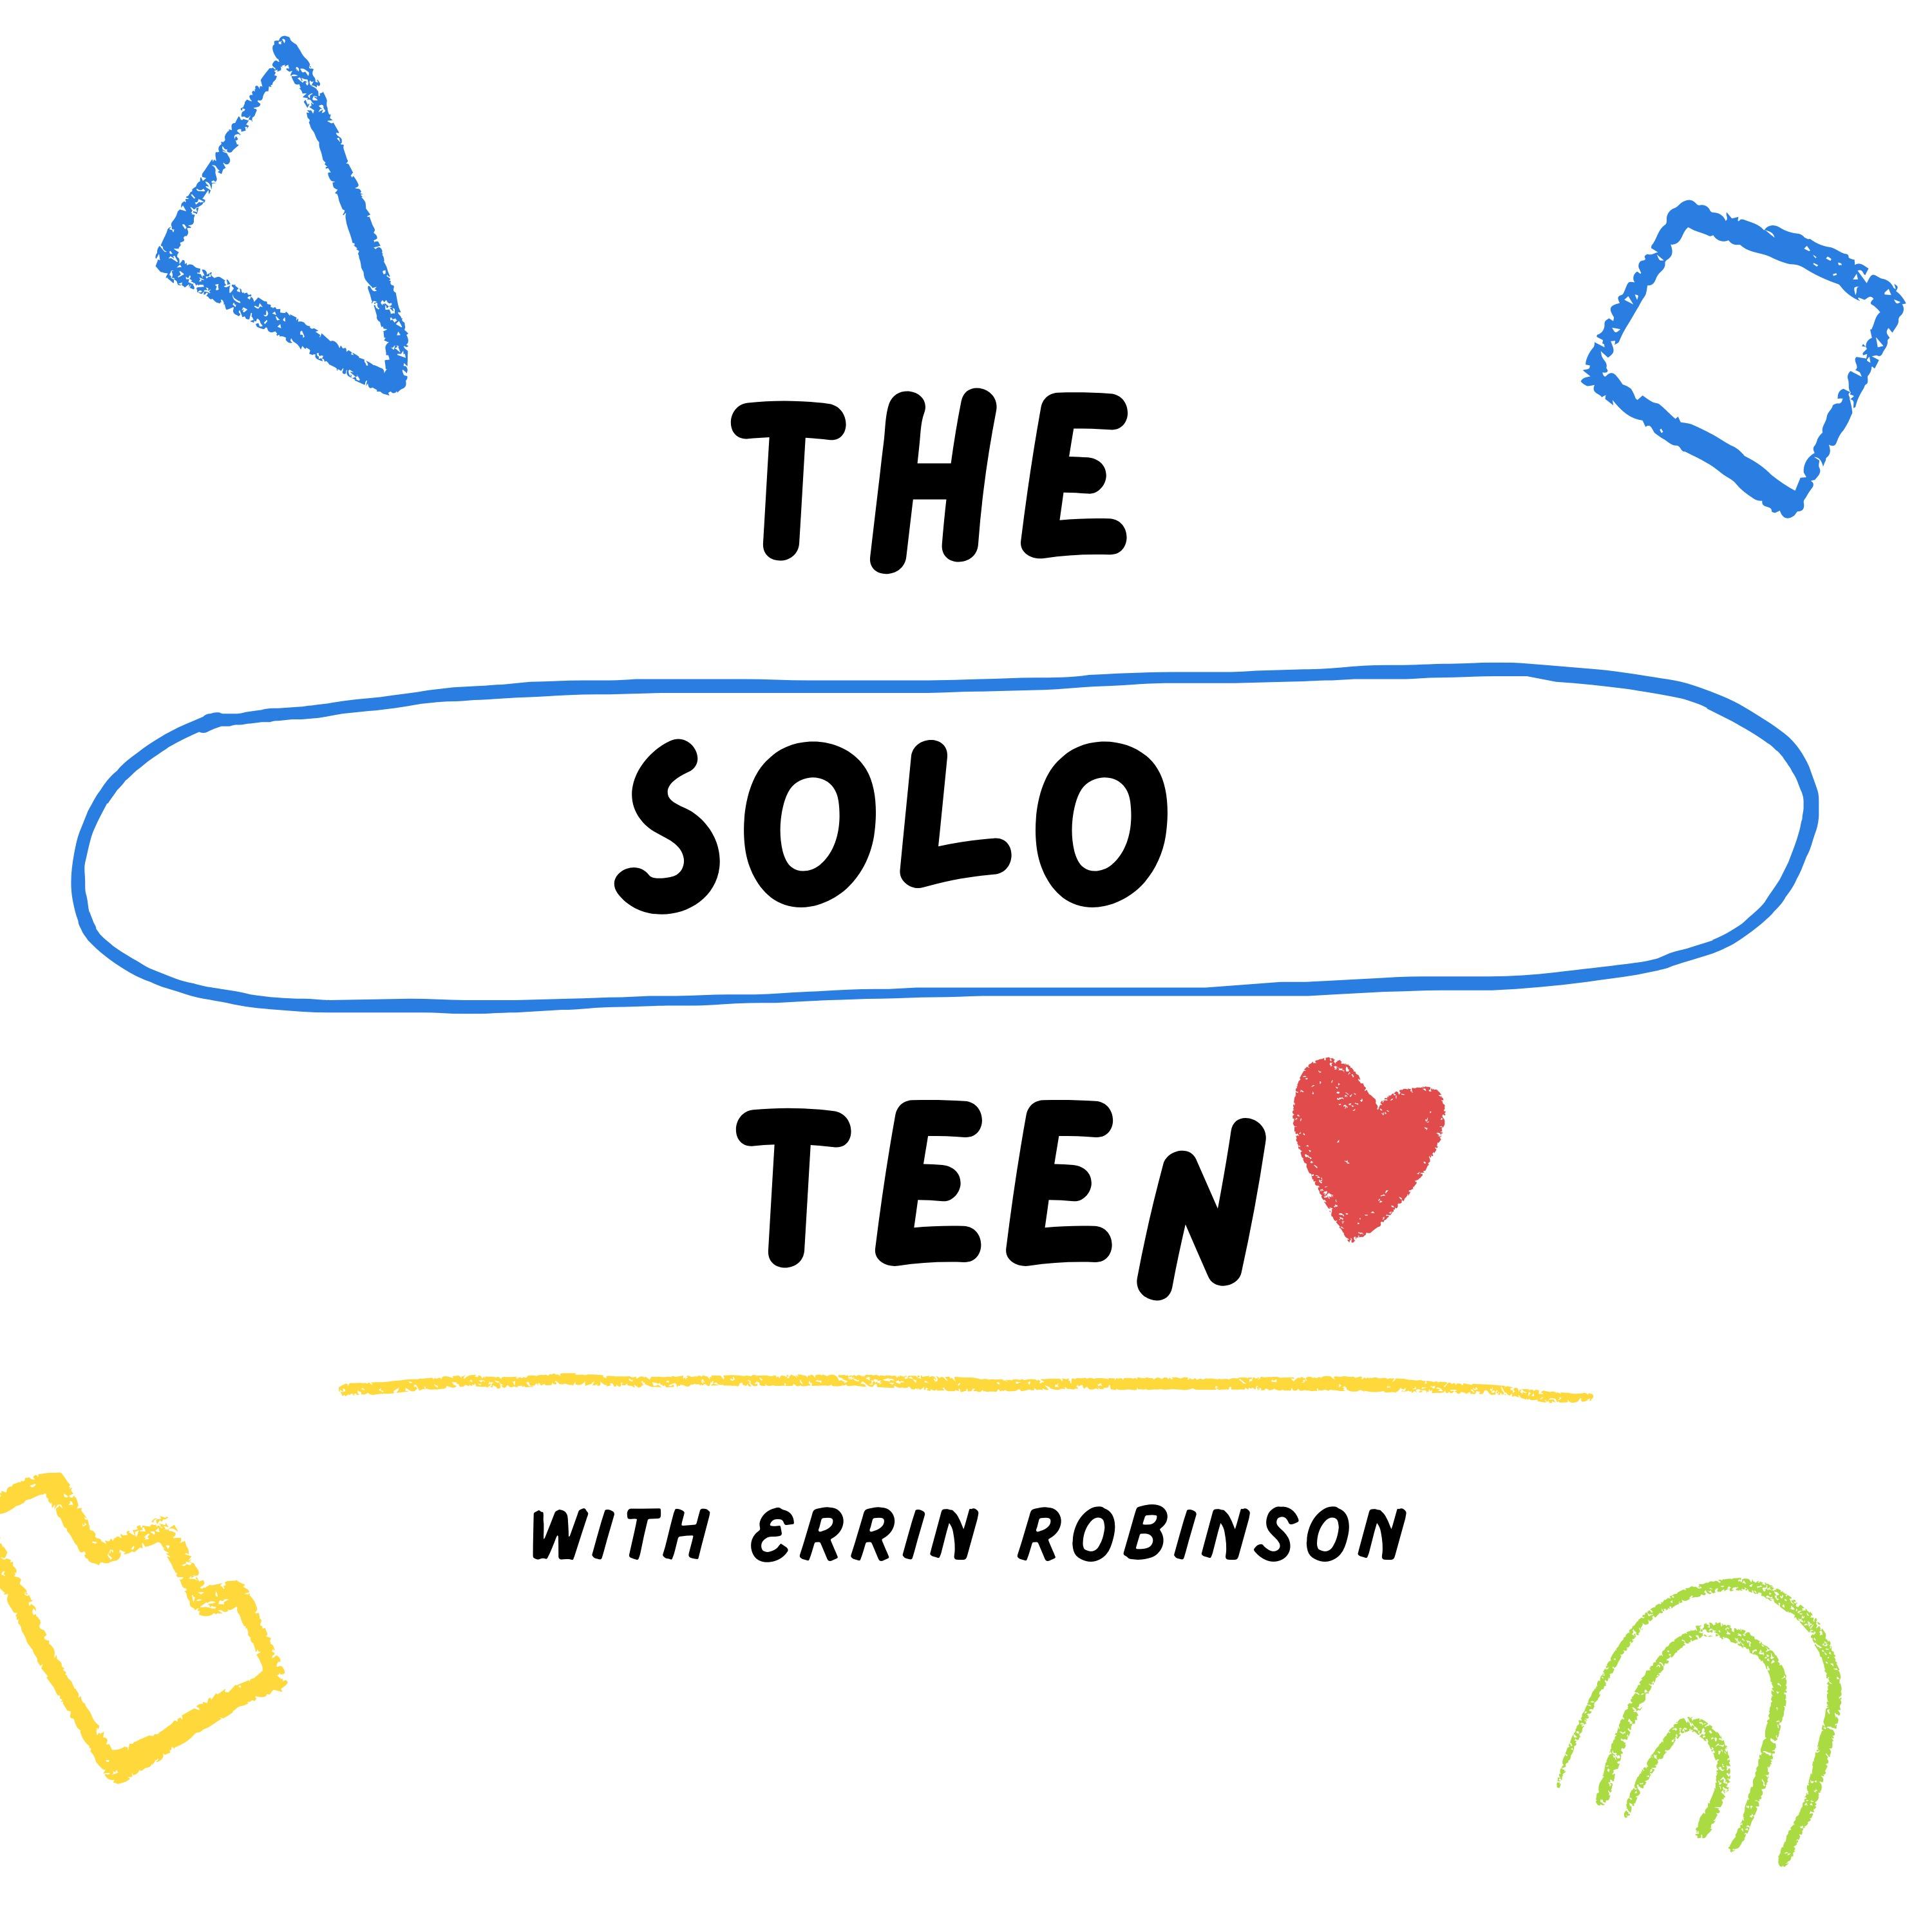 The solo teen